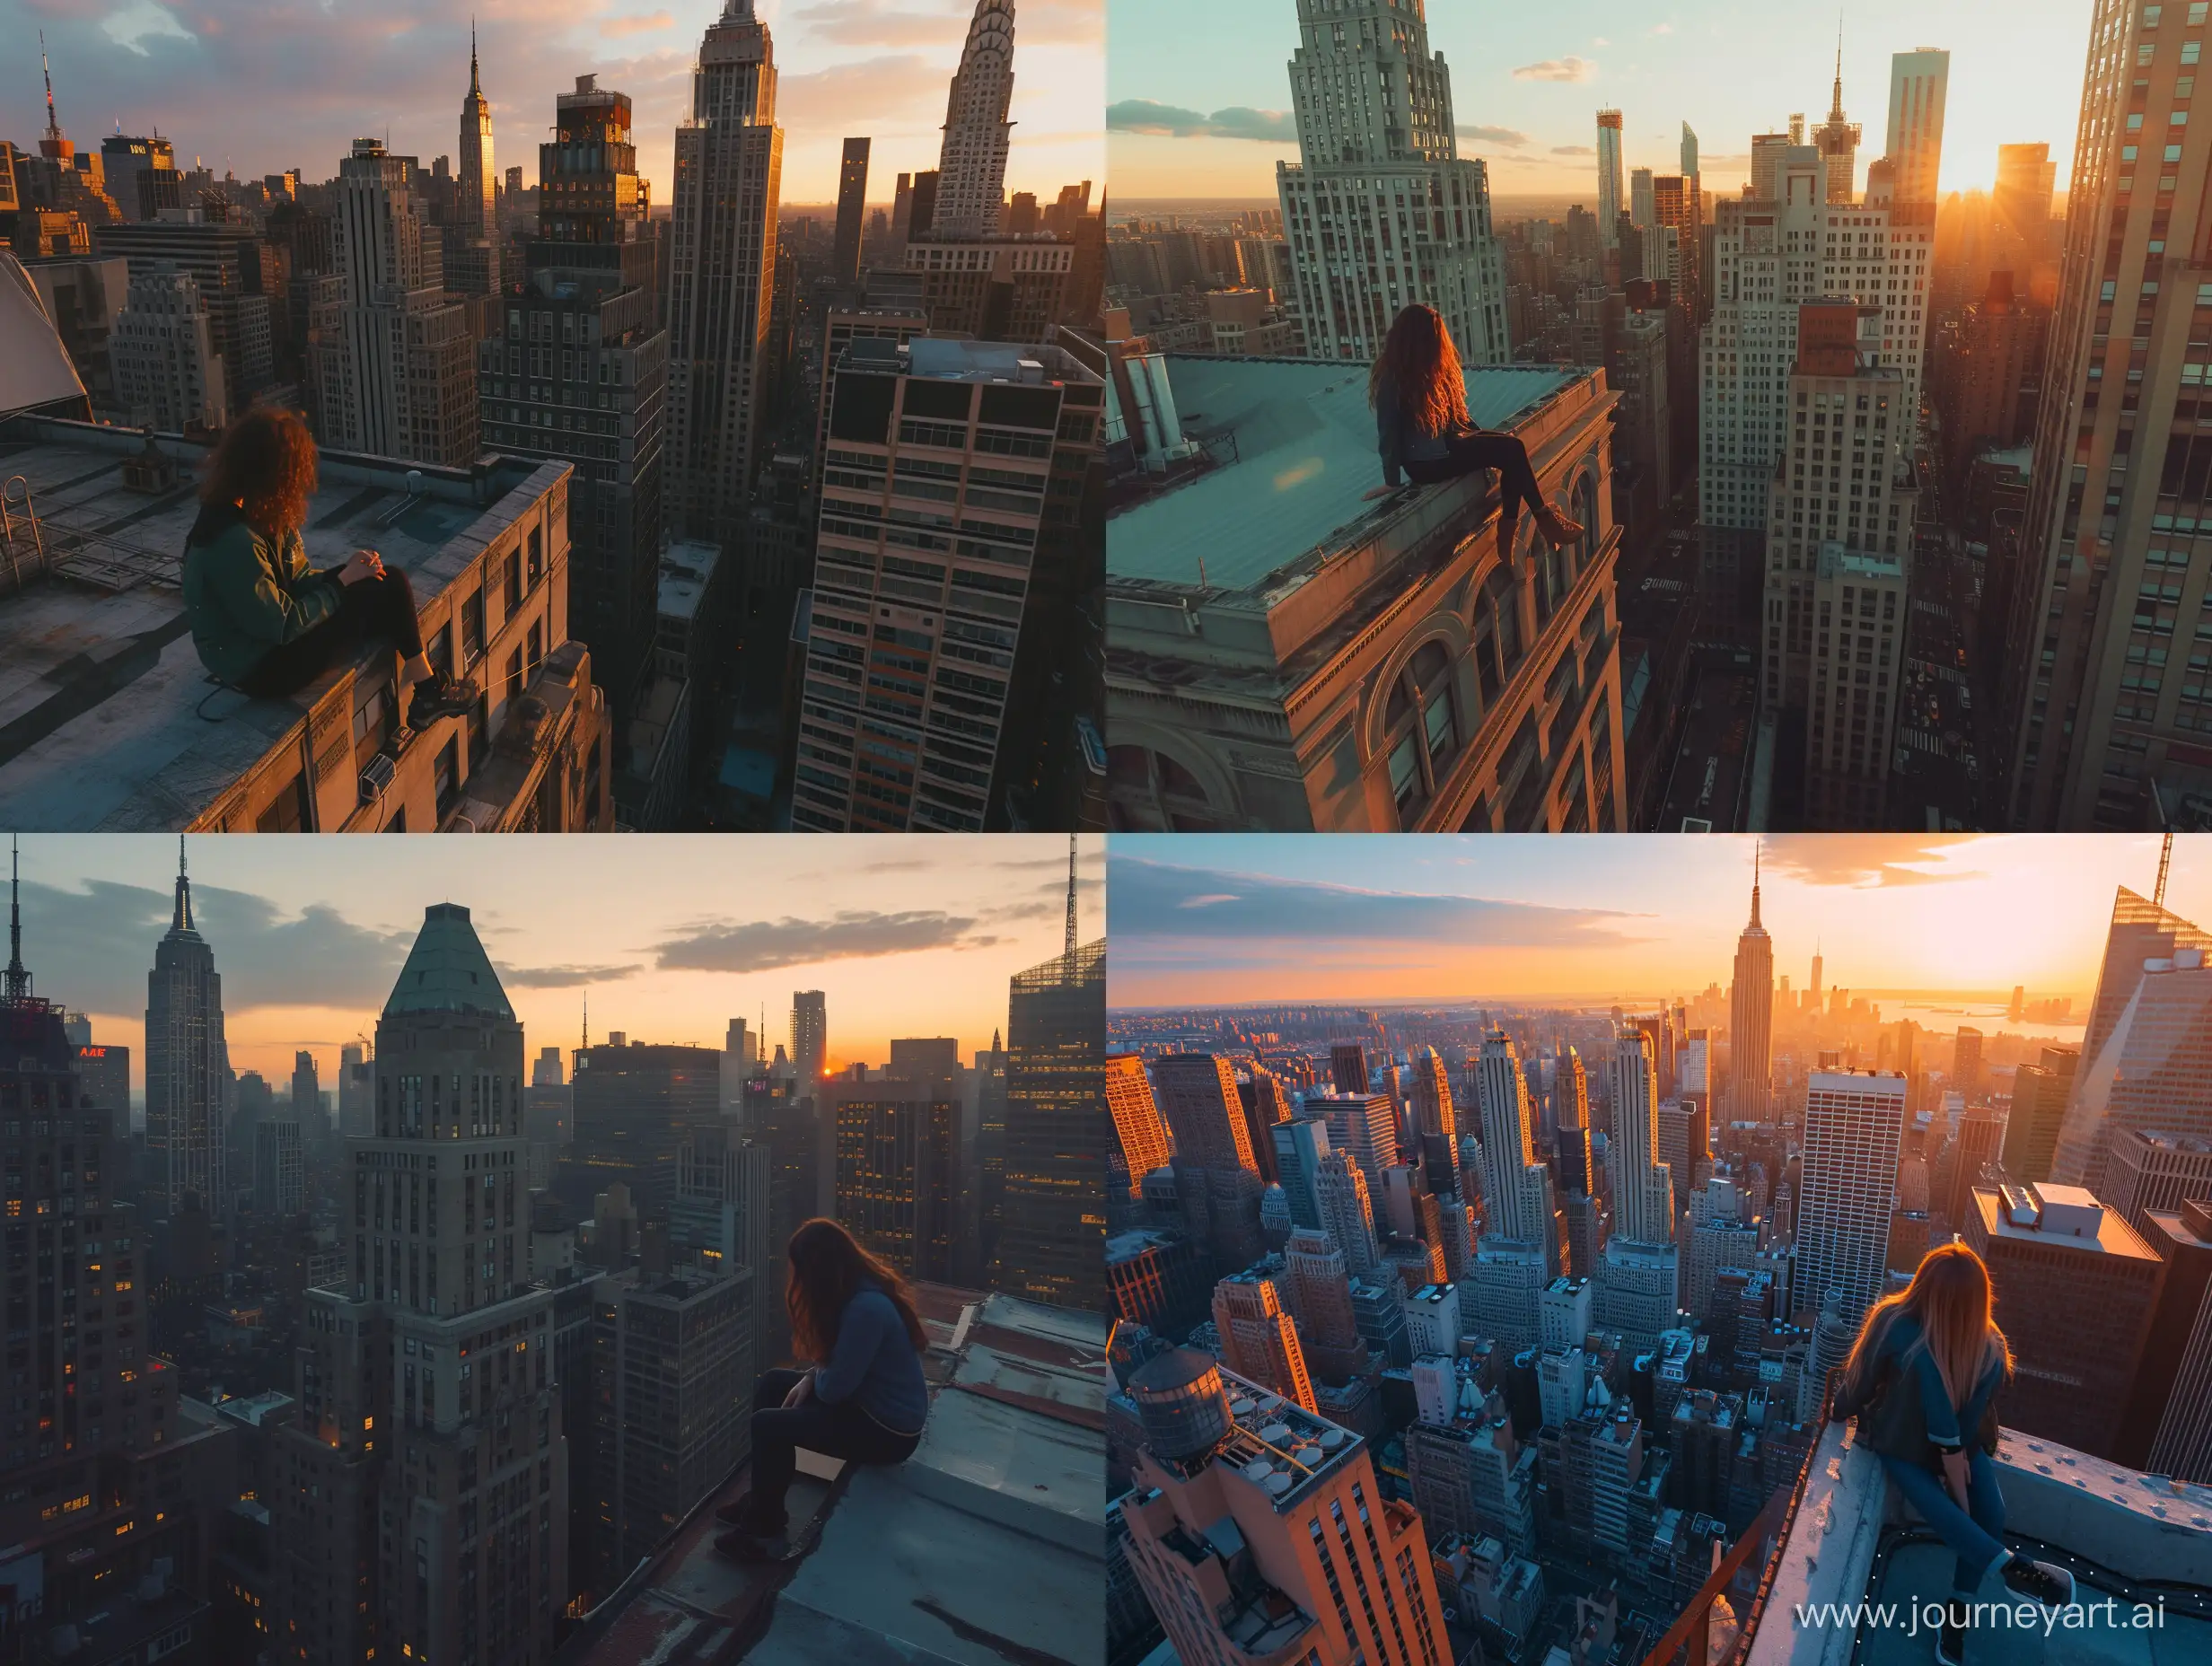 a bustling new new york city, the photo is bathed in natural lighting, sunset time setting. Shot in 4k with a high end DSLR camera. such as a Canon EOS R5 with a 50mm f/1. 2 lens, architecture, drone view, skyline, a woman is sitting on the edge of a high rooftop
